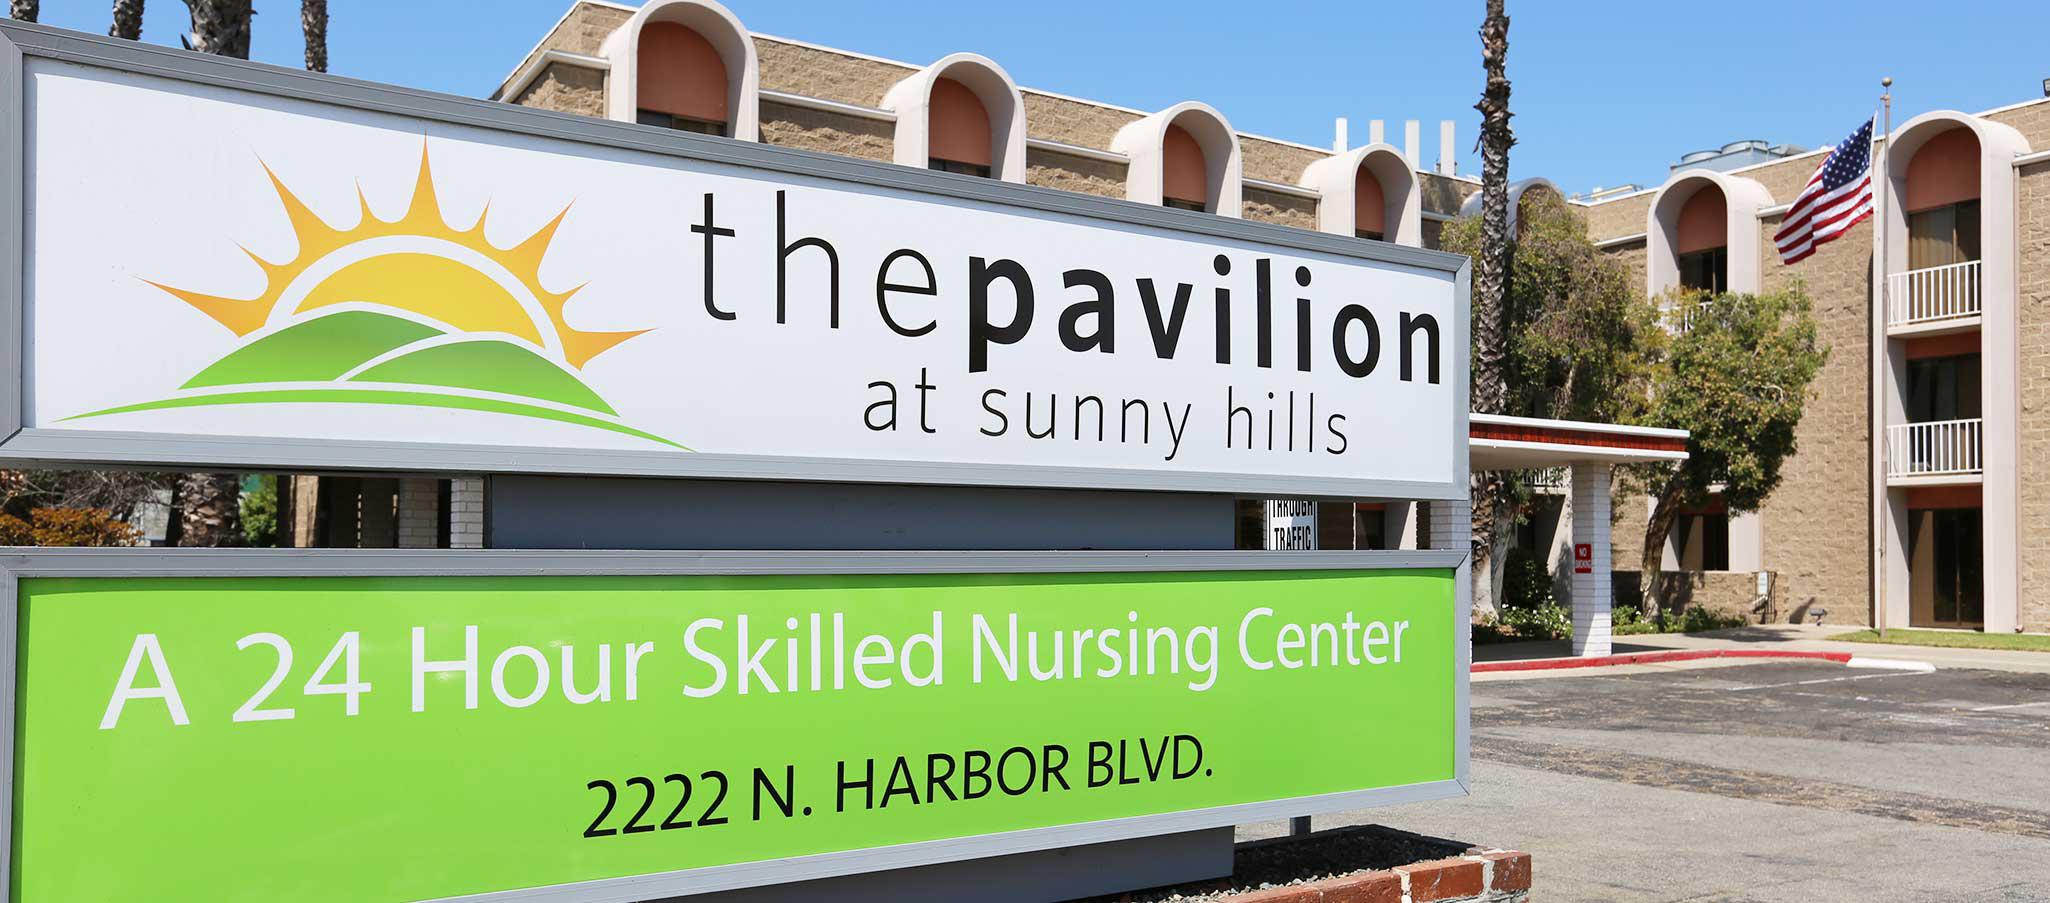 The Pavilion at Sunny Hills Photo